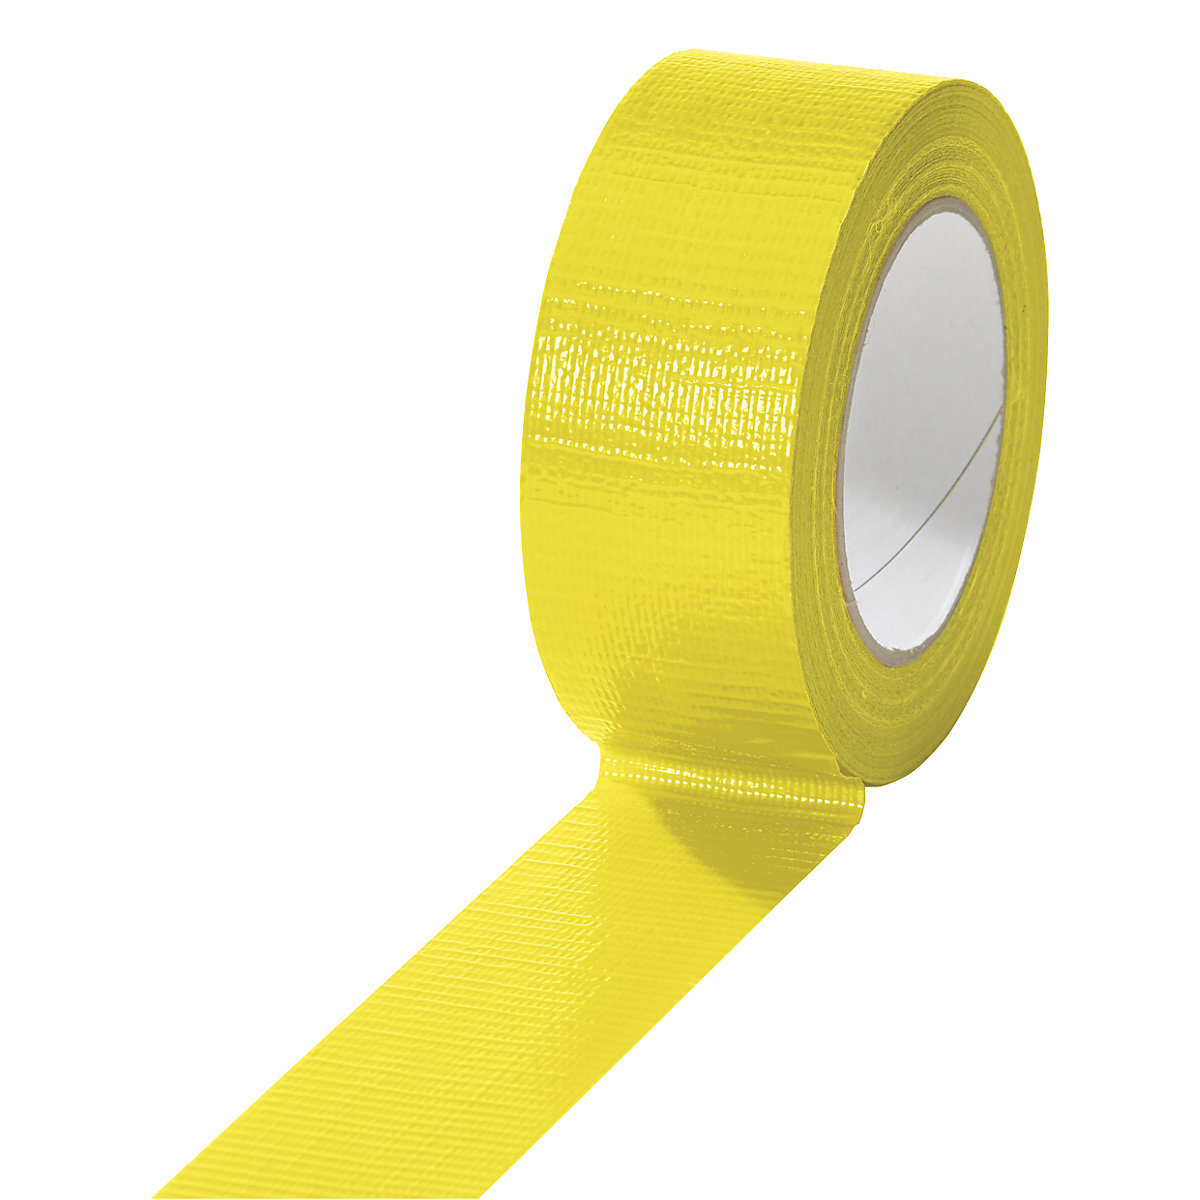 Fabric tape, in different colours, pack of 24 rolls, yellow, tape width 38 mm-14